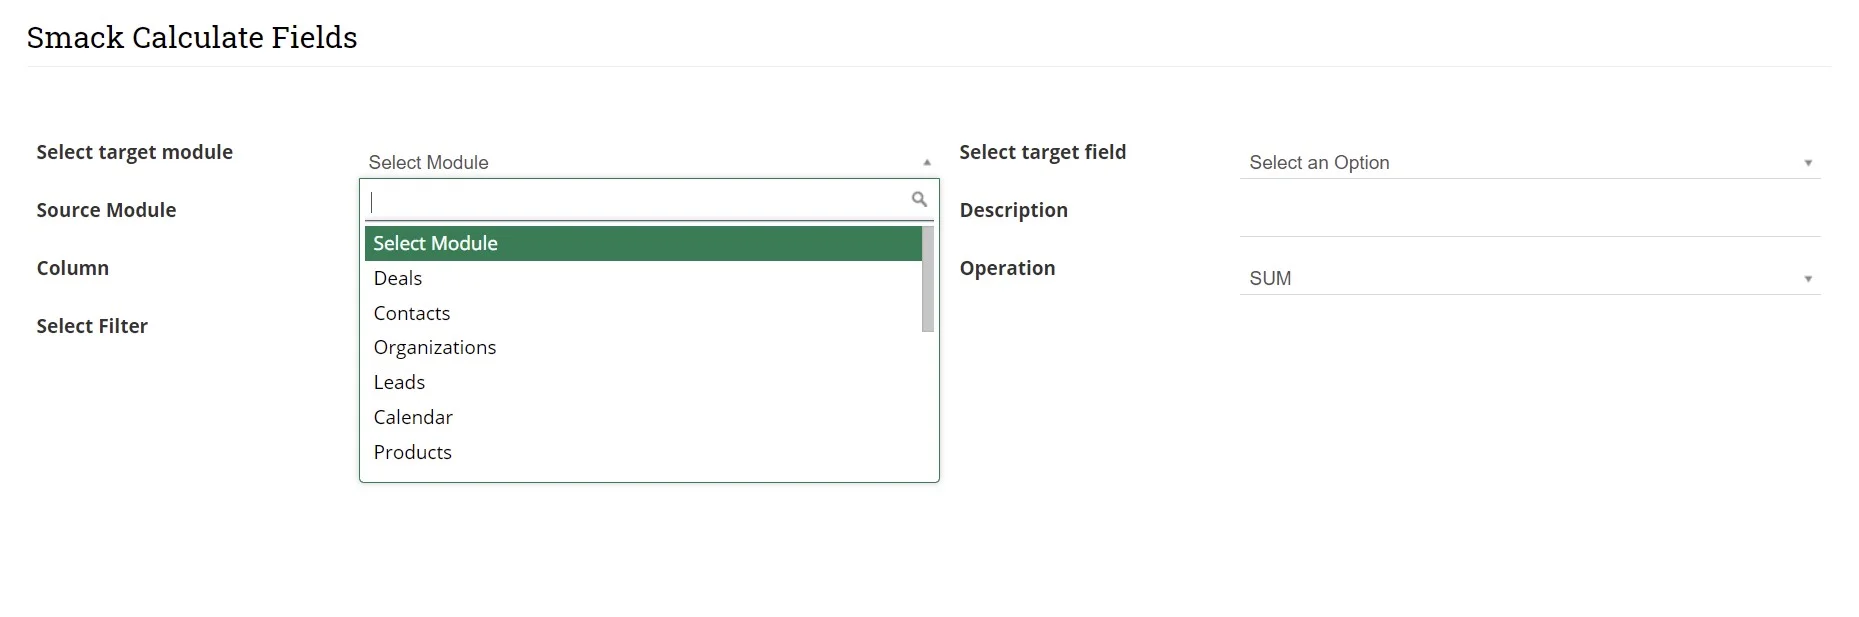 Select target module to configure with Calculate Fields